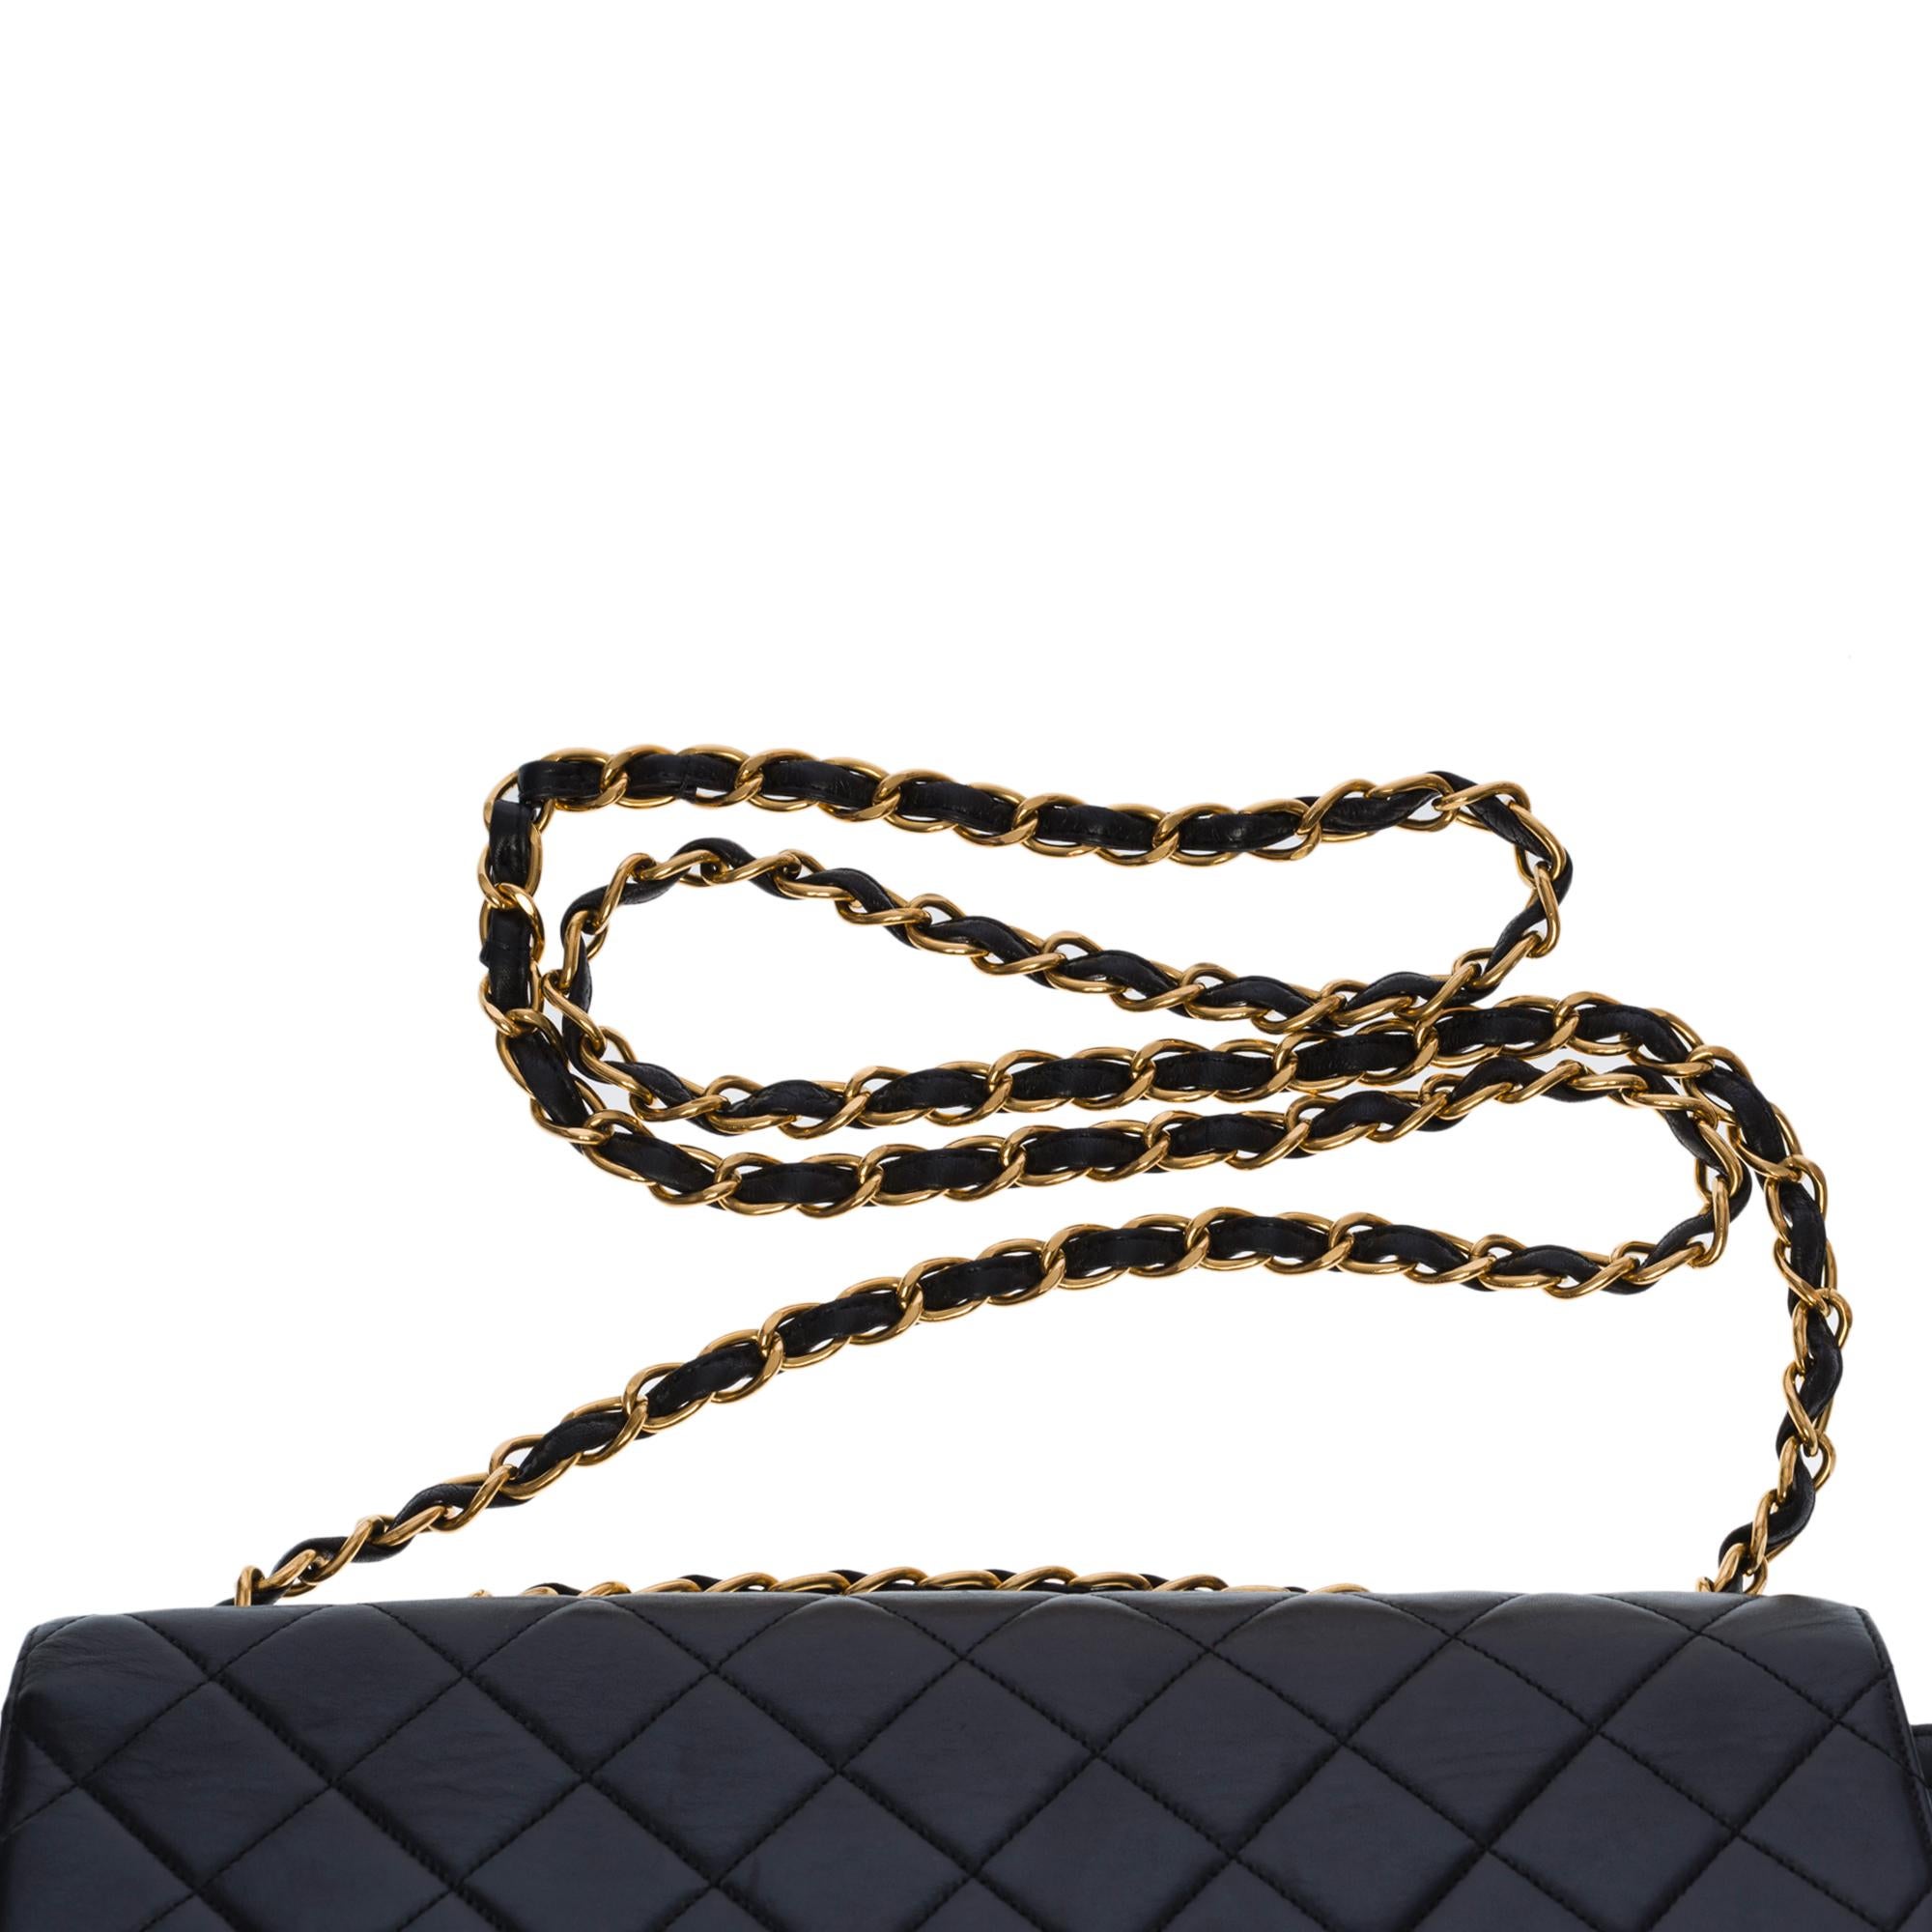 Chanel Timeless Jumbo single flap shoulder bag in black quilted lambskin, GHW For Sale 1